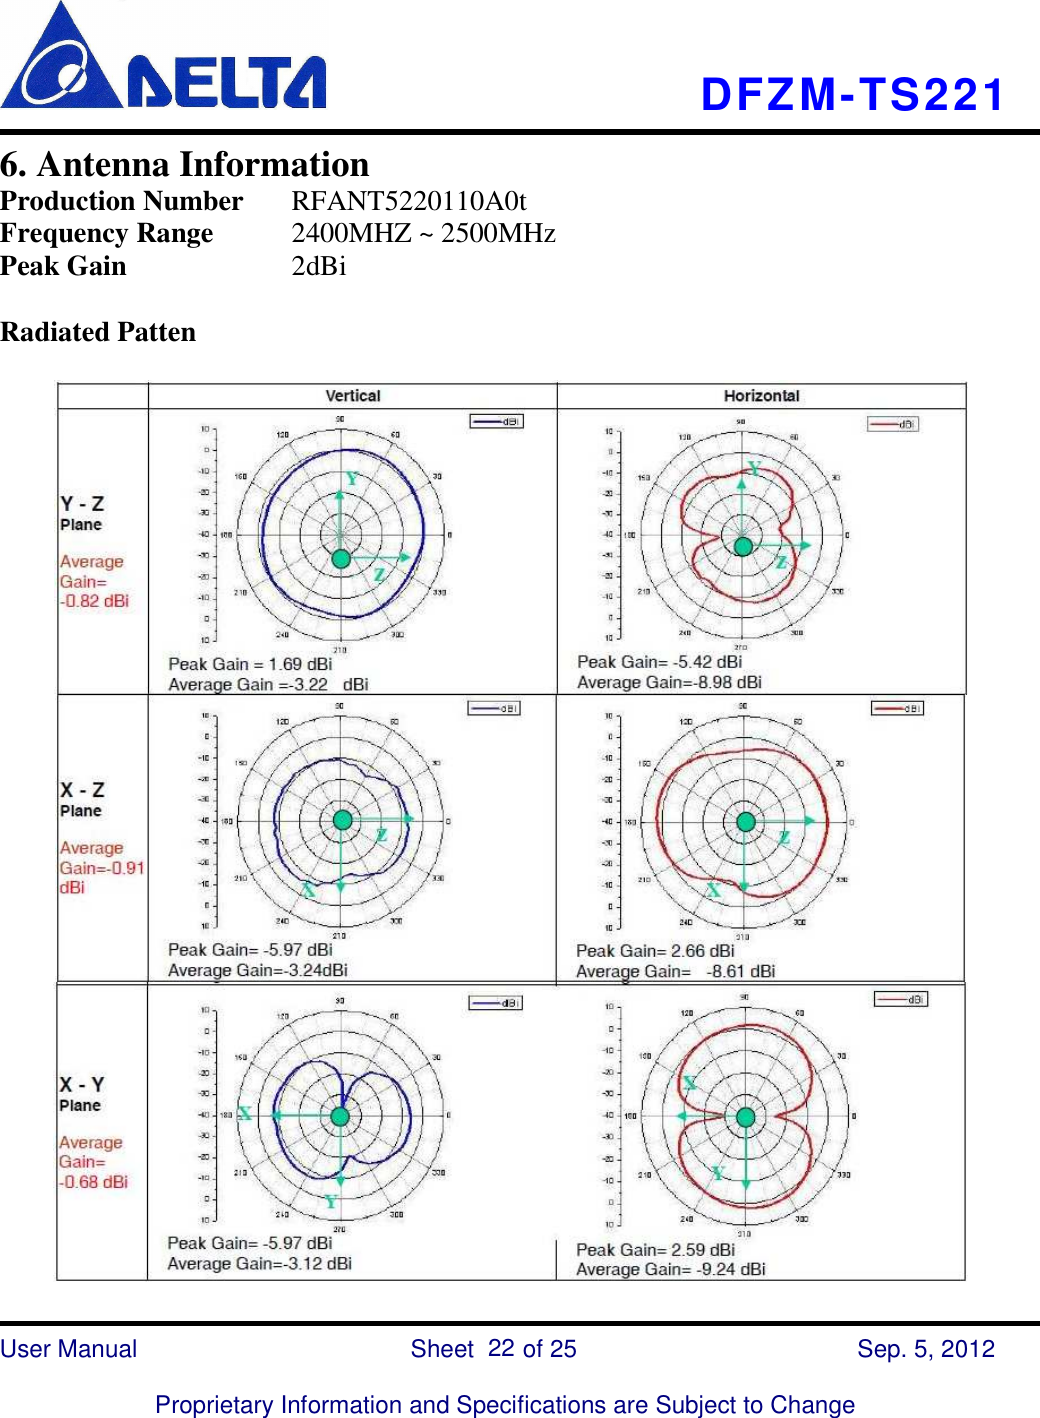    DFZM-TS221    User Manual                            Sheet        of 25      Sep. 5, 2012  Proprietary Information and Specifications are Subject to Change 22 6. Antenna Information Production Number  RFANT5220110A0t Frequency Range    2400MHZ ~ 2500MHz Peak Gain        2dBi  Radiated Patten     